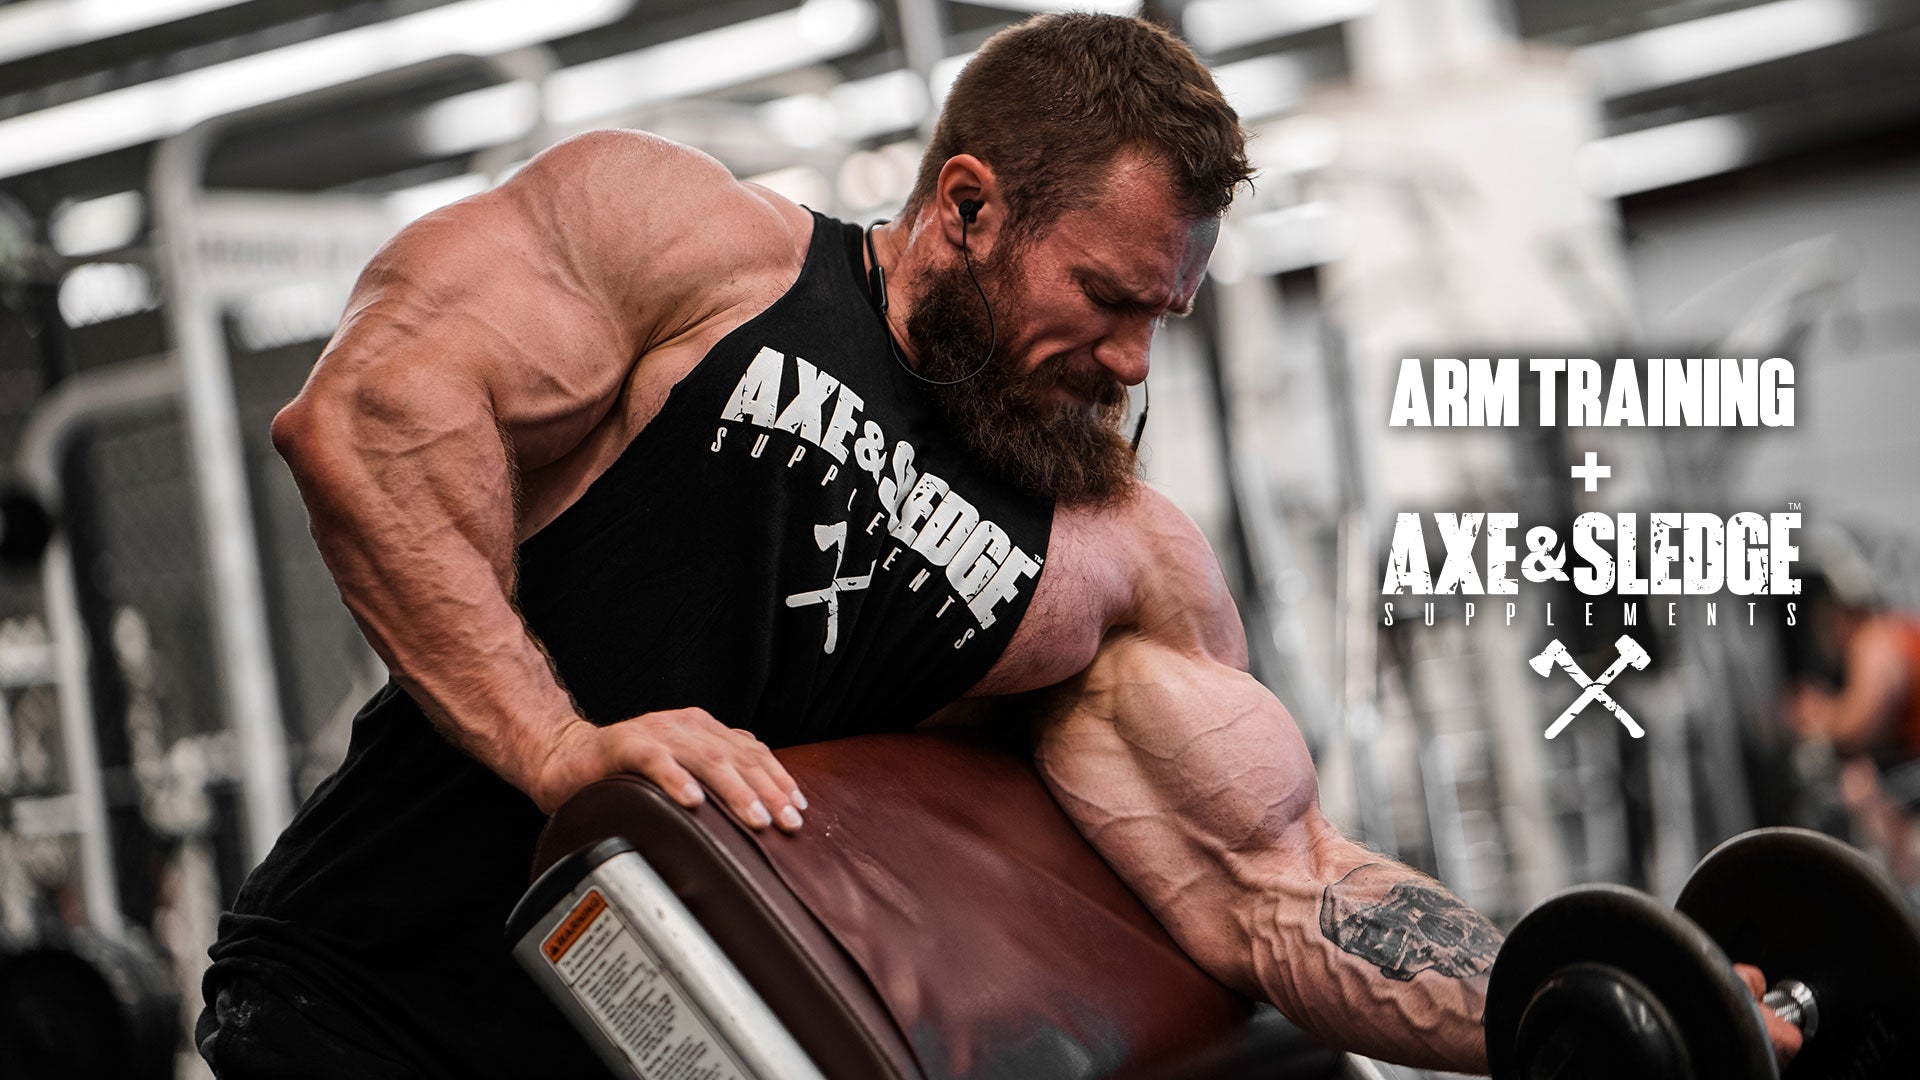 Axe & Sledge Supplements Lineup | Arm Training